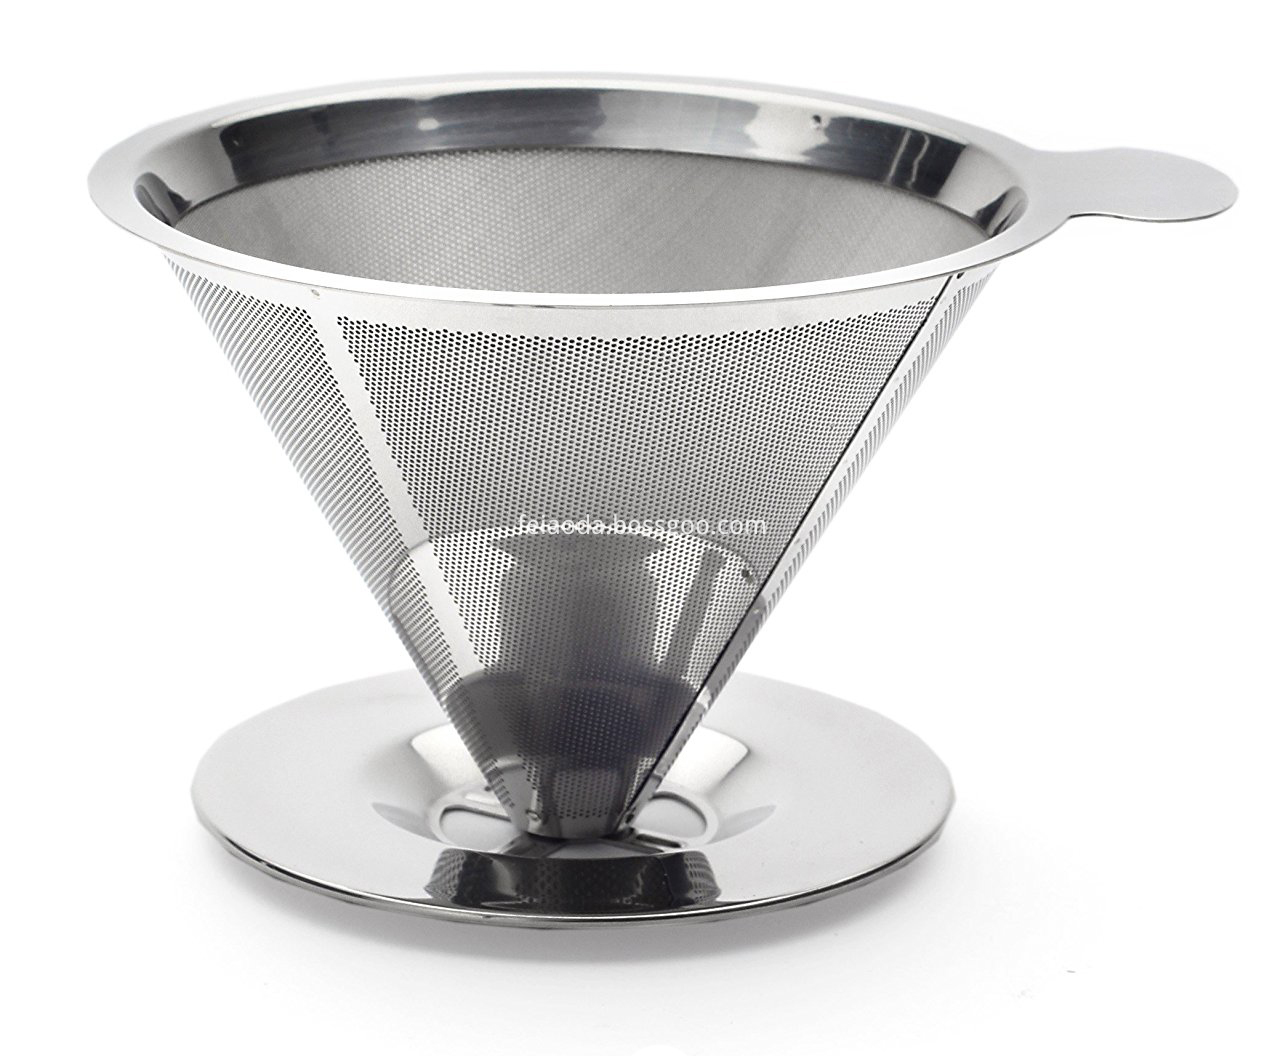 Pour Over Coffee Dripper with Scoop